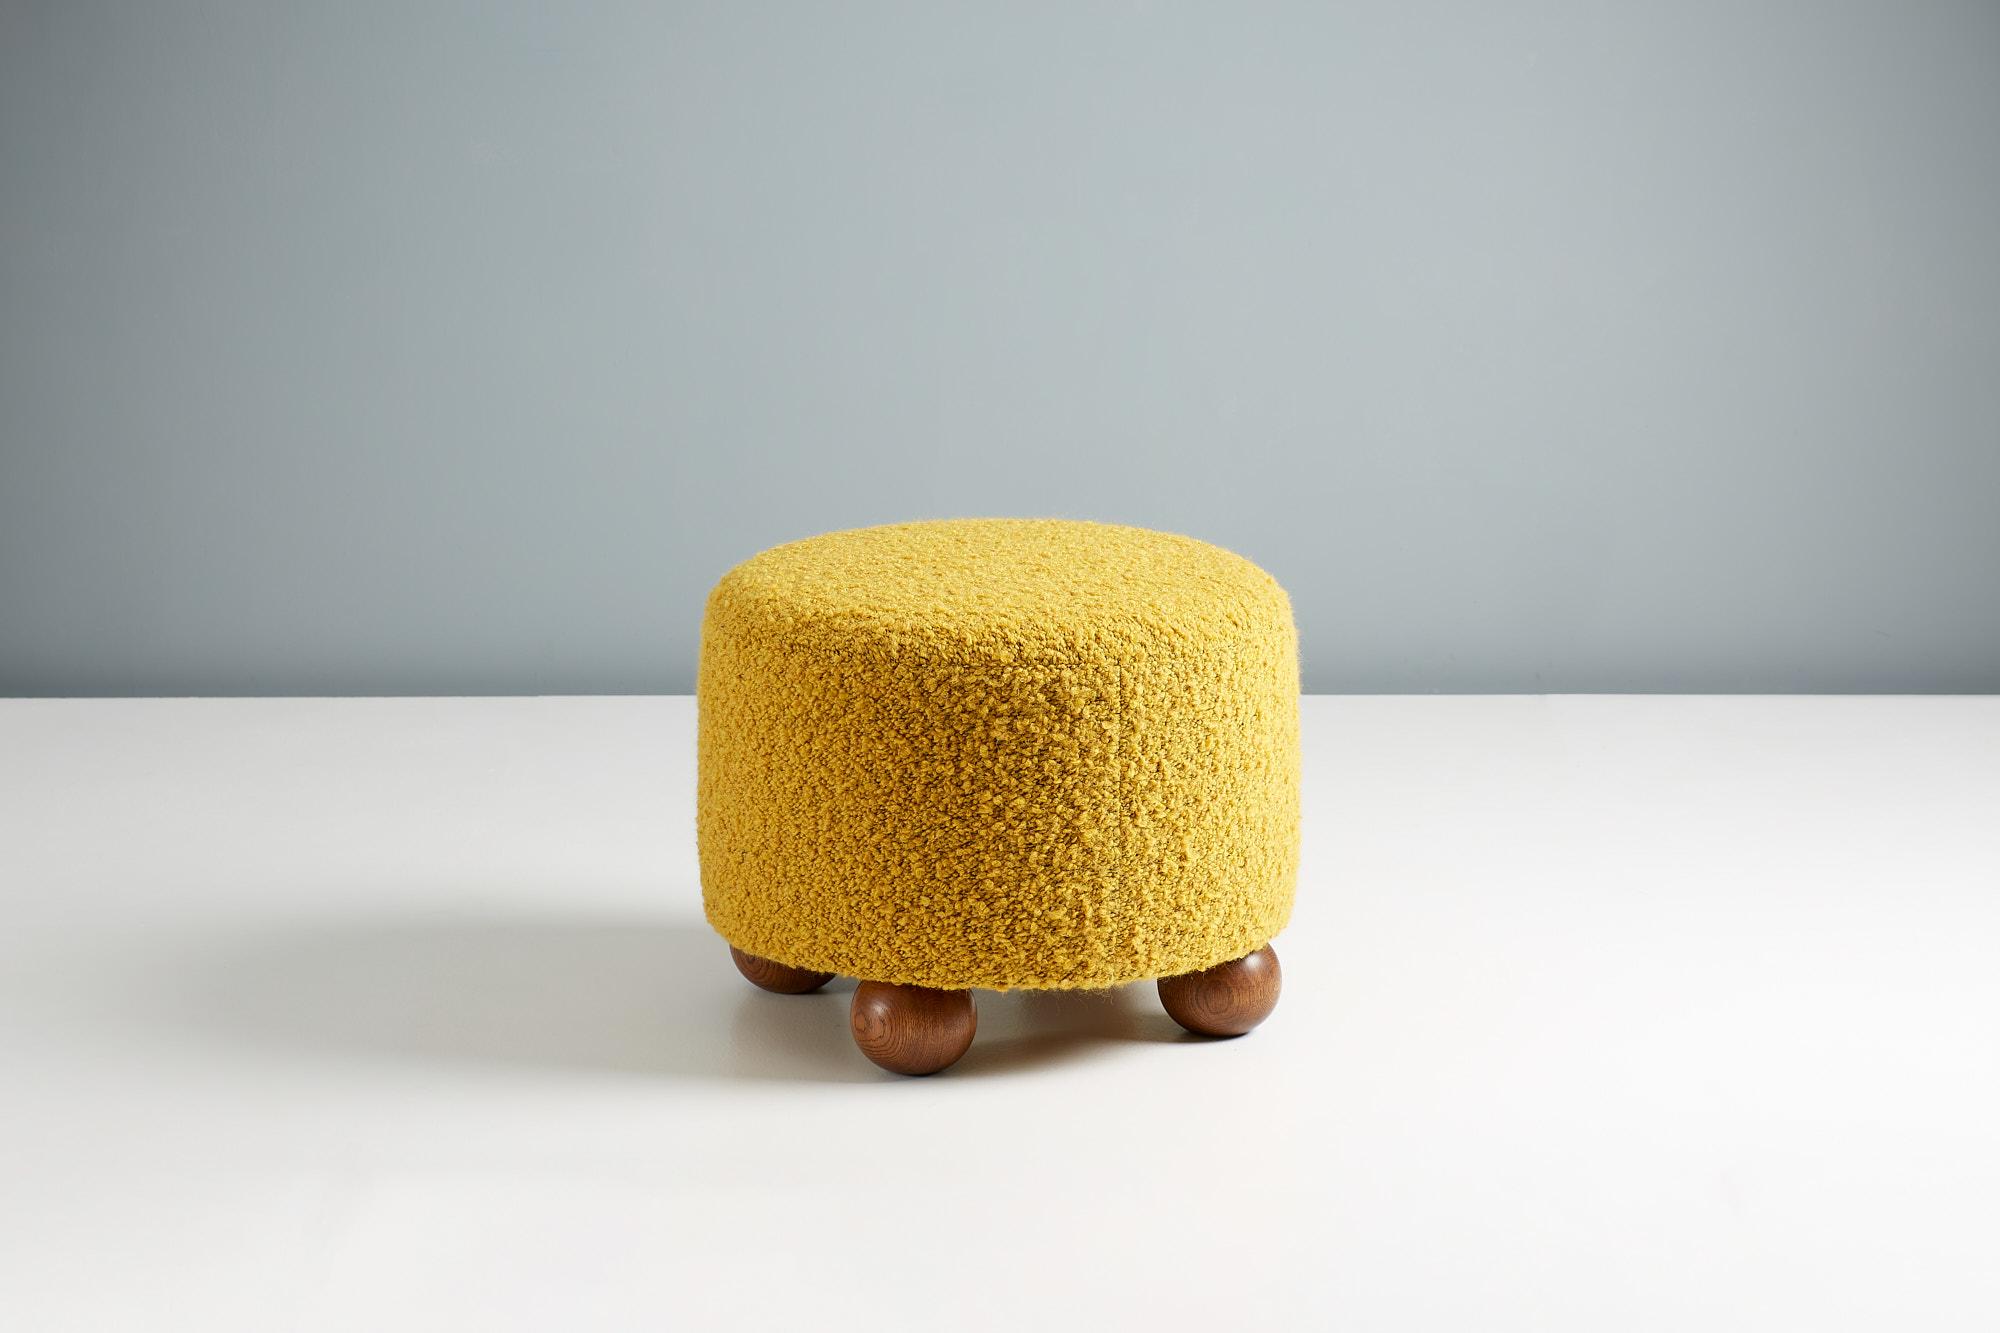 Dagmar Design - Round Ottoman.

Custom-made ottomans developed & produced at our workshops in London using the highest quality materials. These examples are upholstered in Pierre Frey OPIO boucle fabric in a vivid yellow colour-way The distinctive